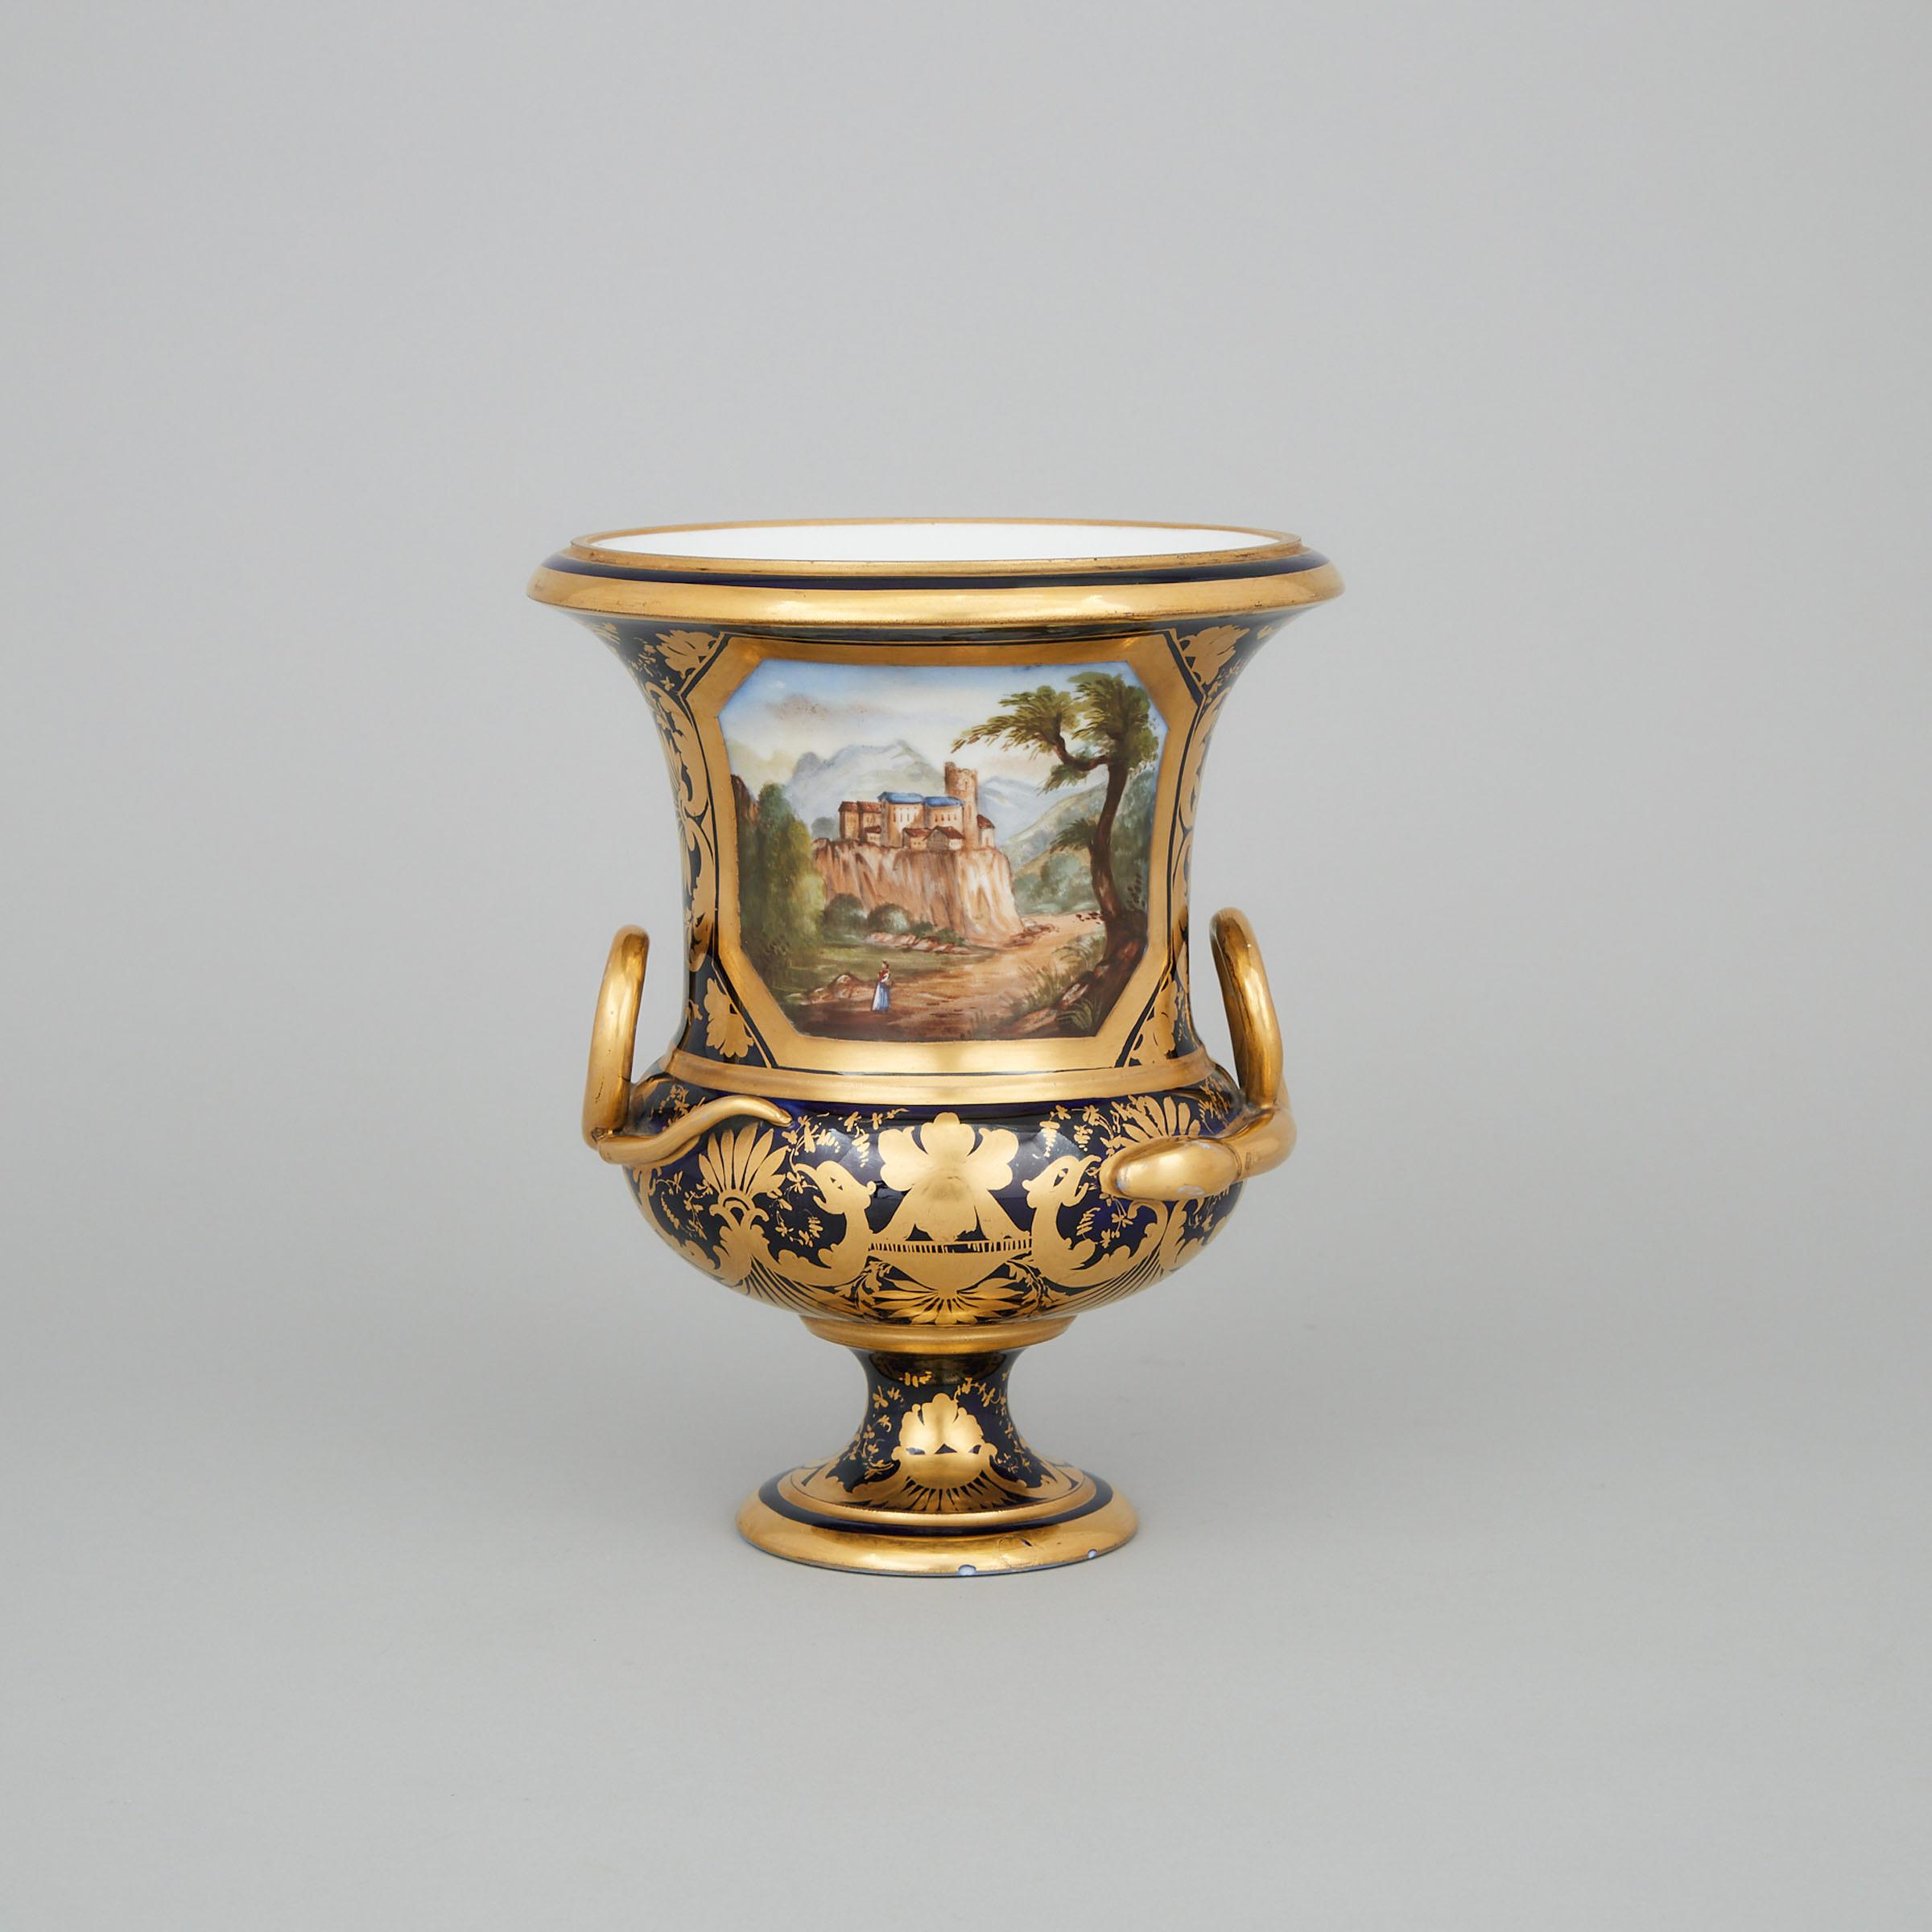 Samson ‘Derby’ Blue and Gilt Ground Campana Shaped Vase, late 19th/early 20th century